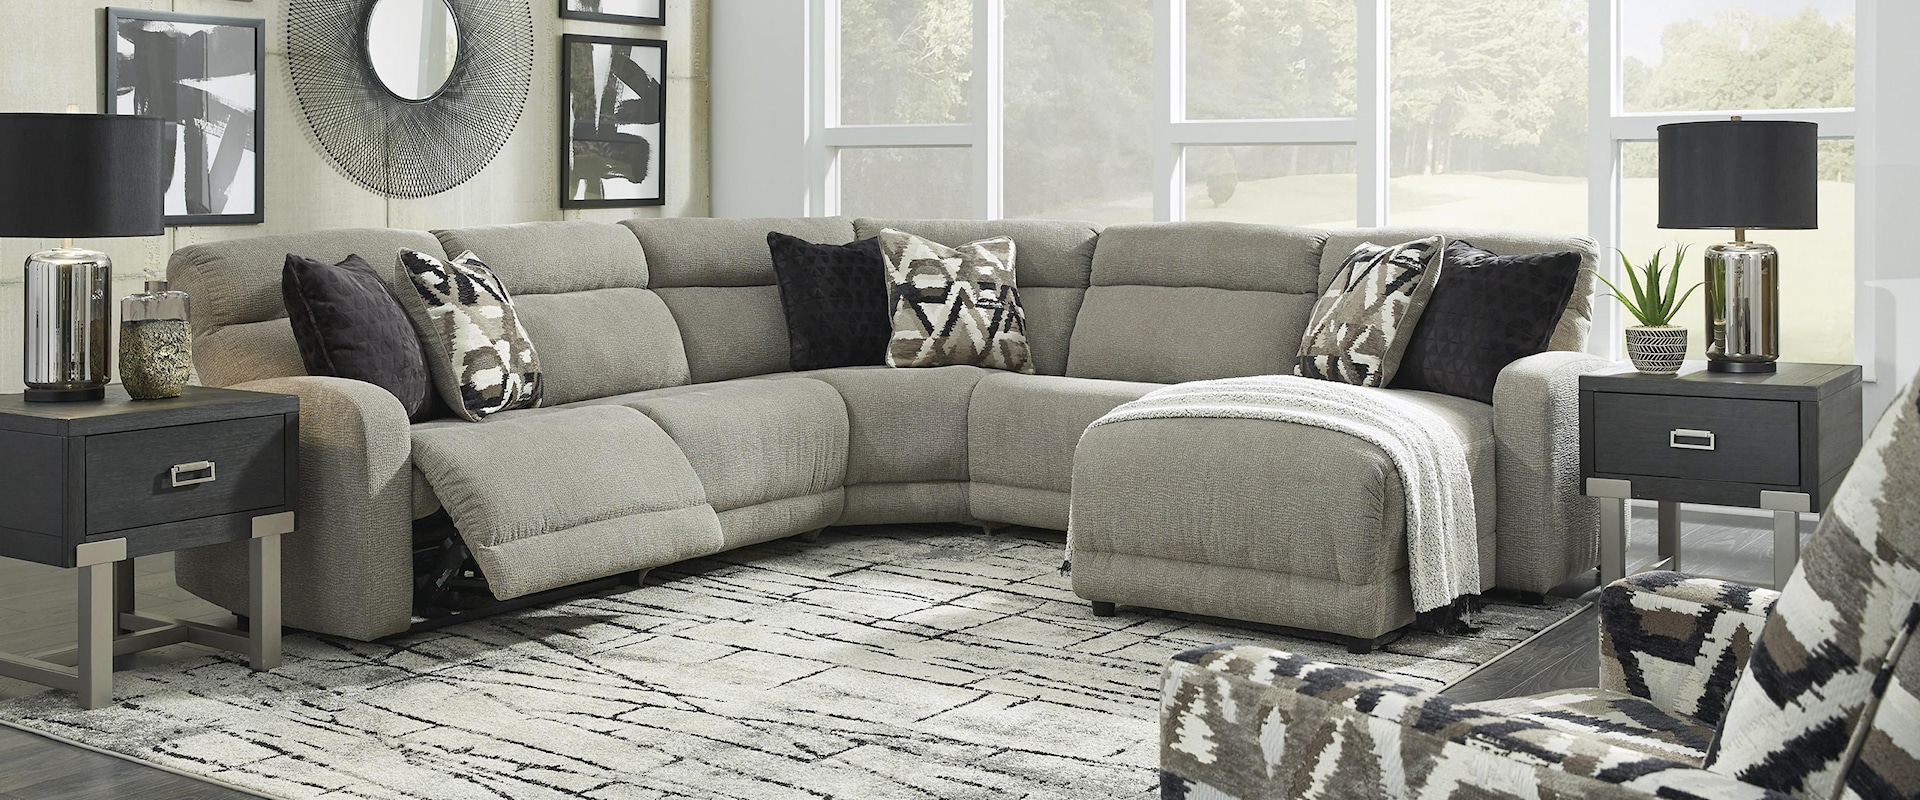 7 Piece Stone Power Recliner Sectional Sofa Chaise Set